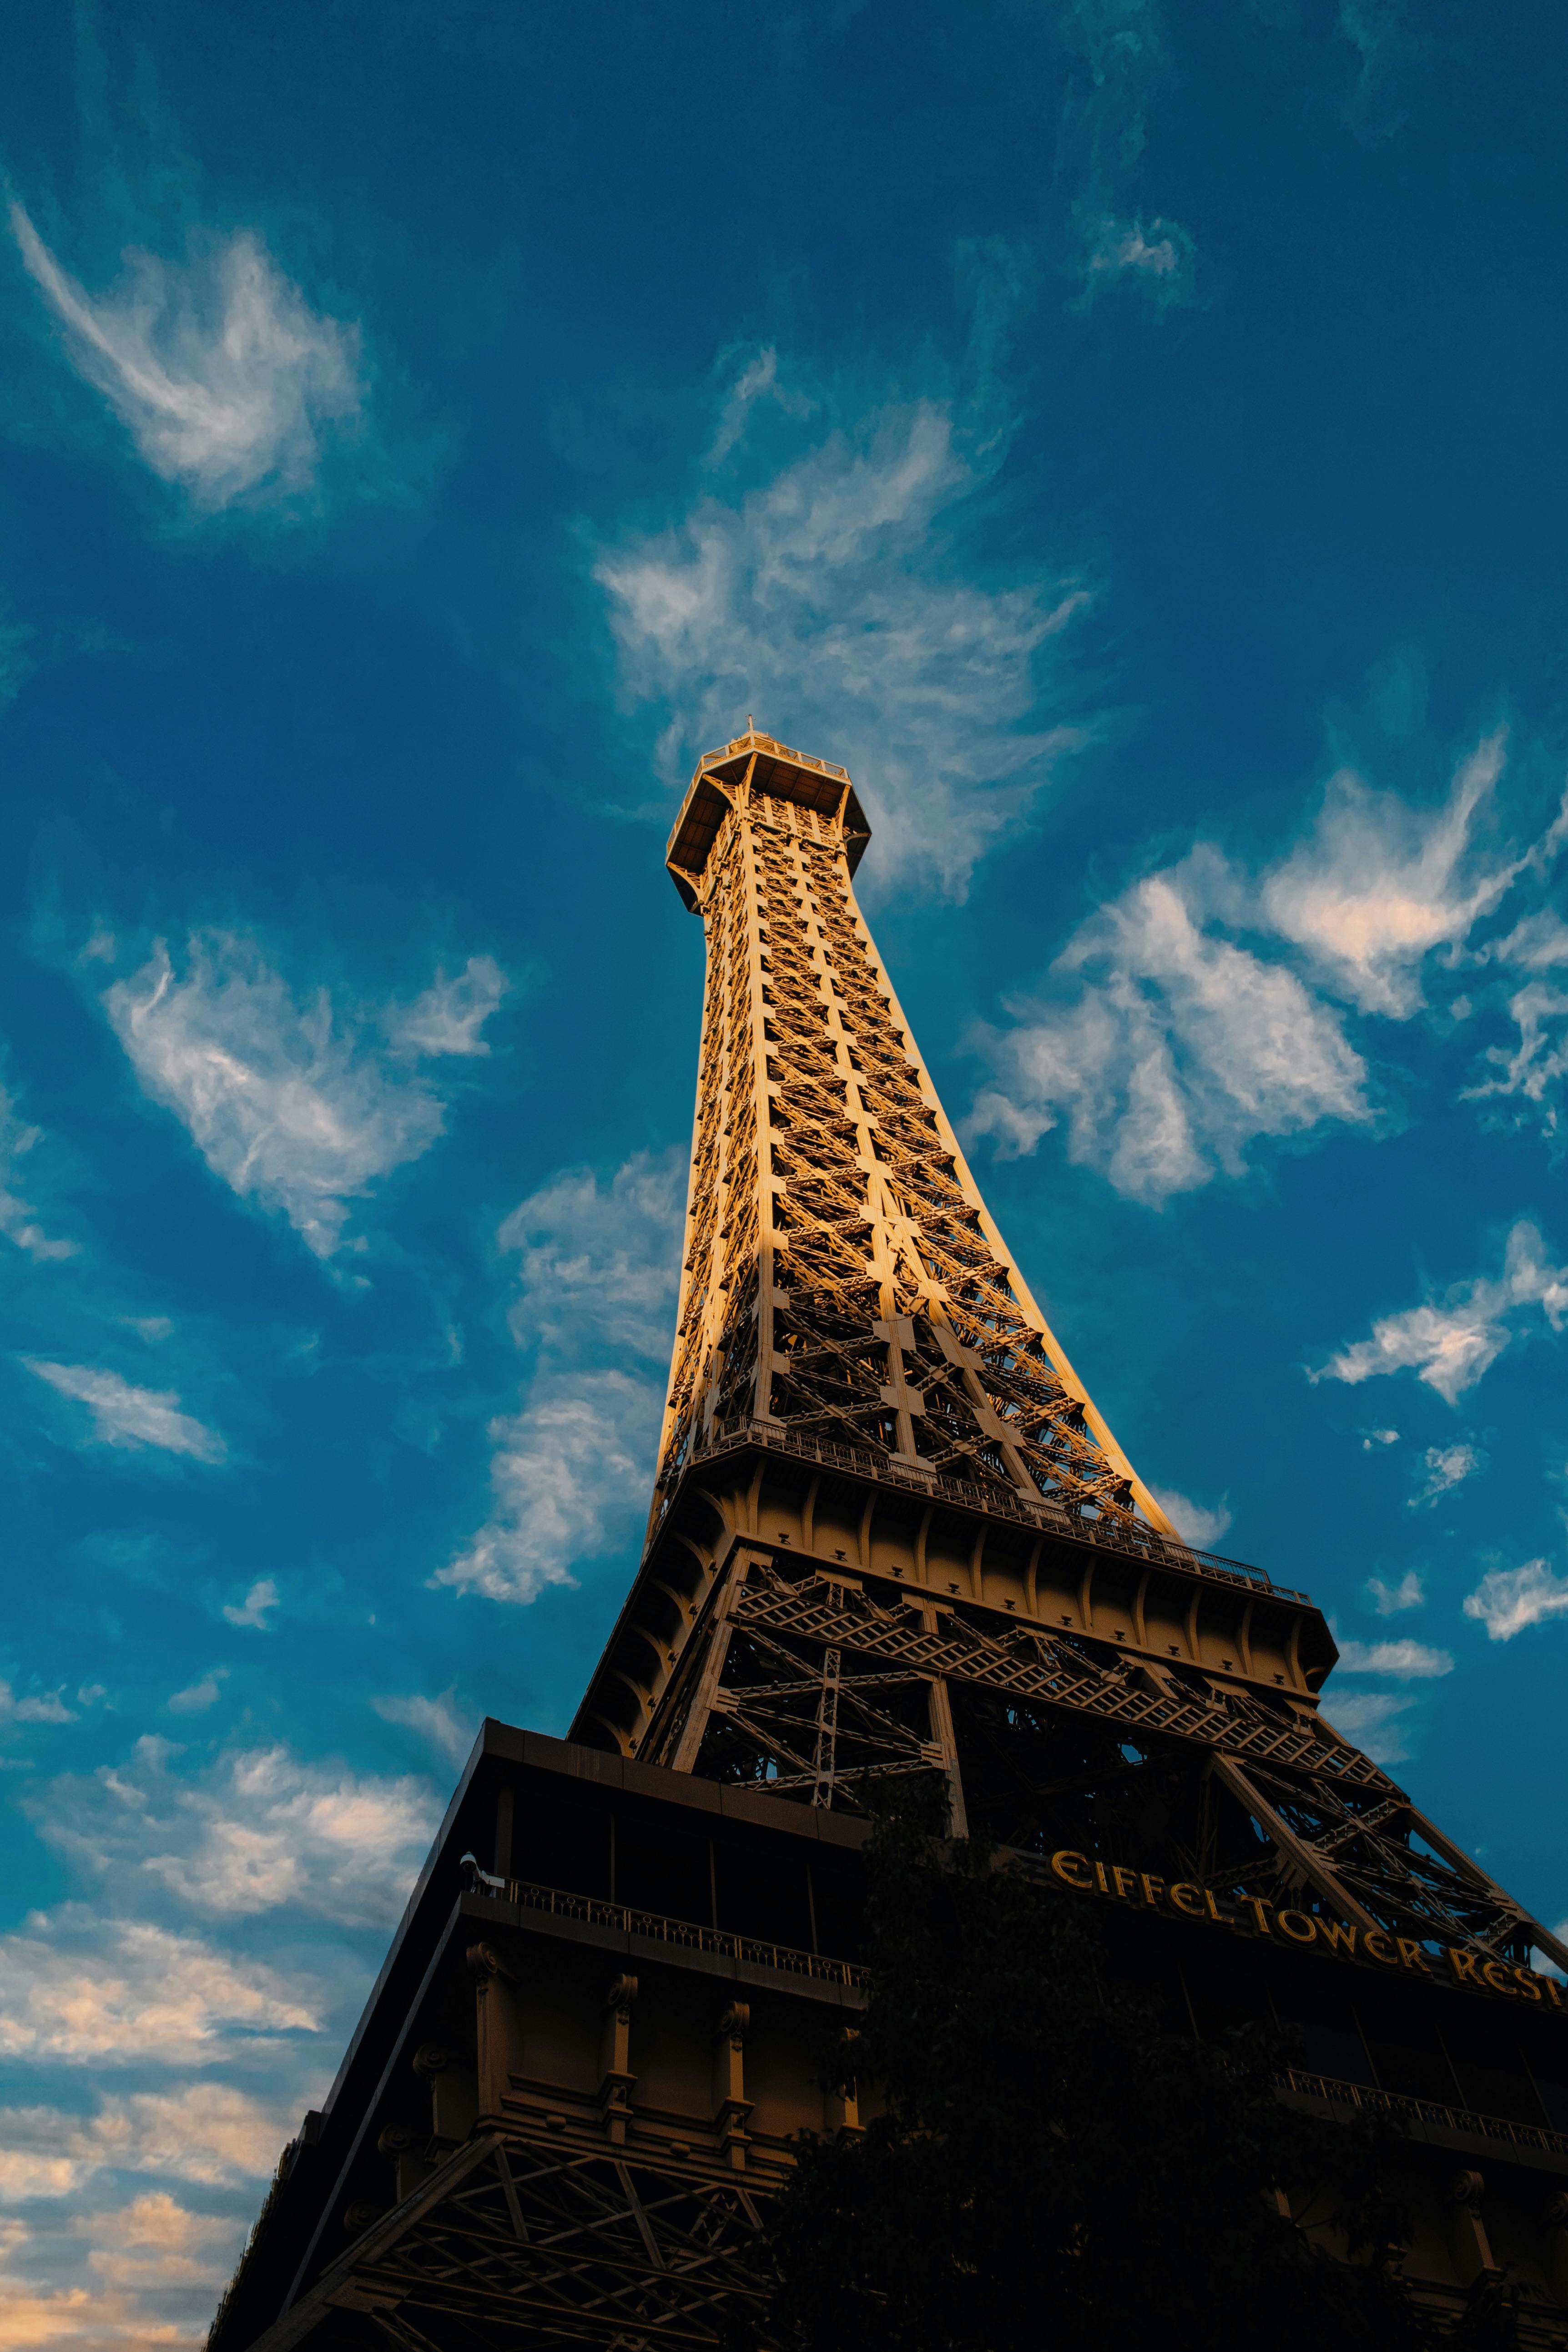 Replica Of Eiffel Tower At The Paris Hotel On Las Vegas Boulevard, Las Vegas,  Nevada Stock Photo, Picture and Royalty Free Image. Image 10770340.